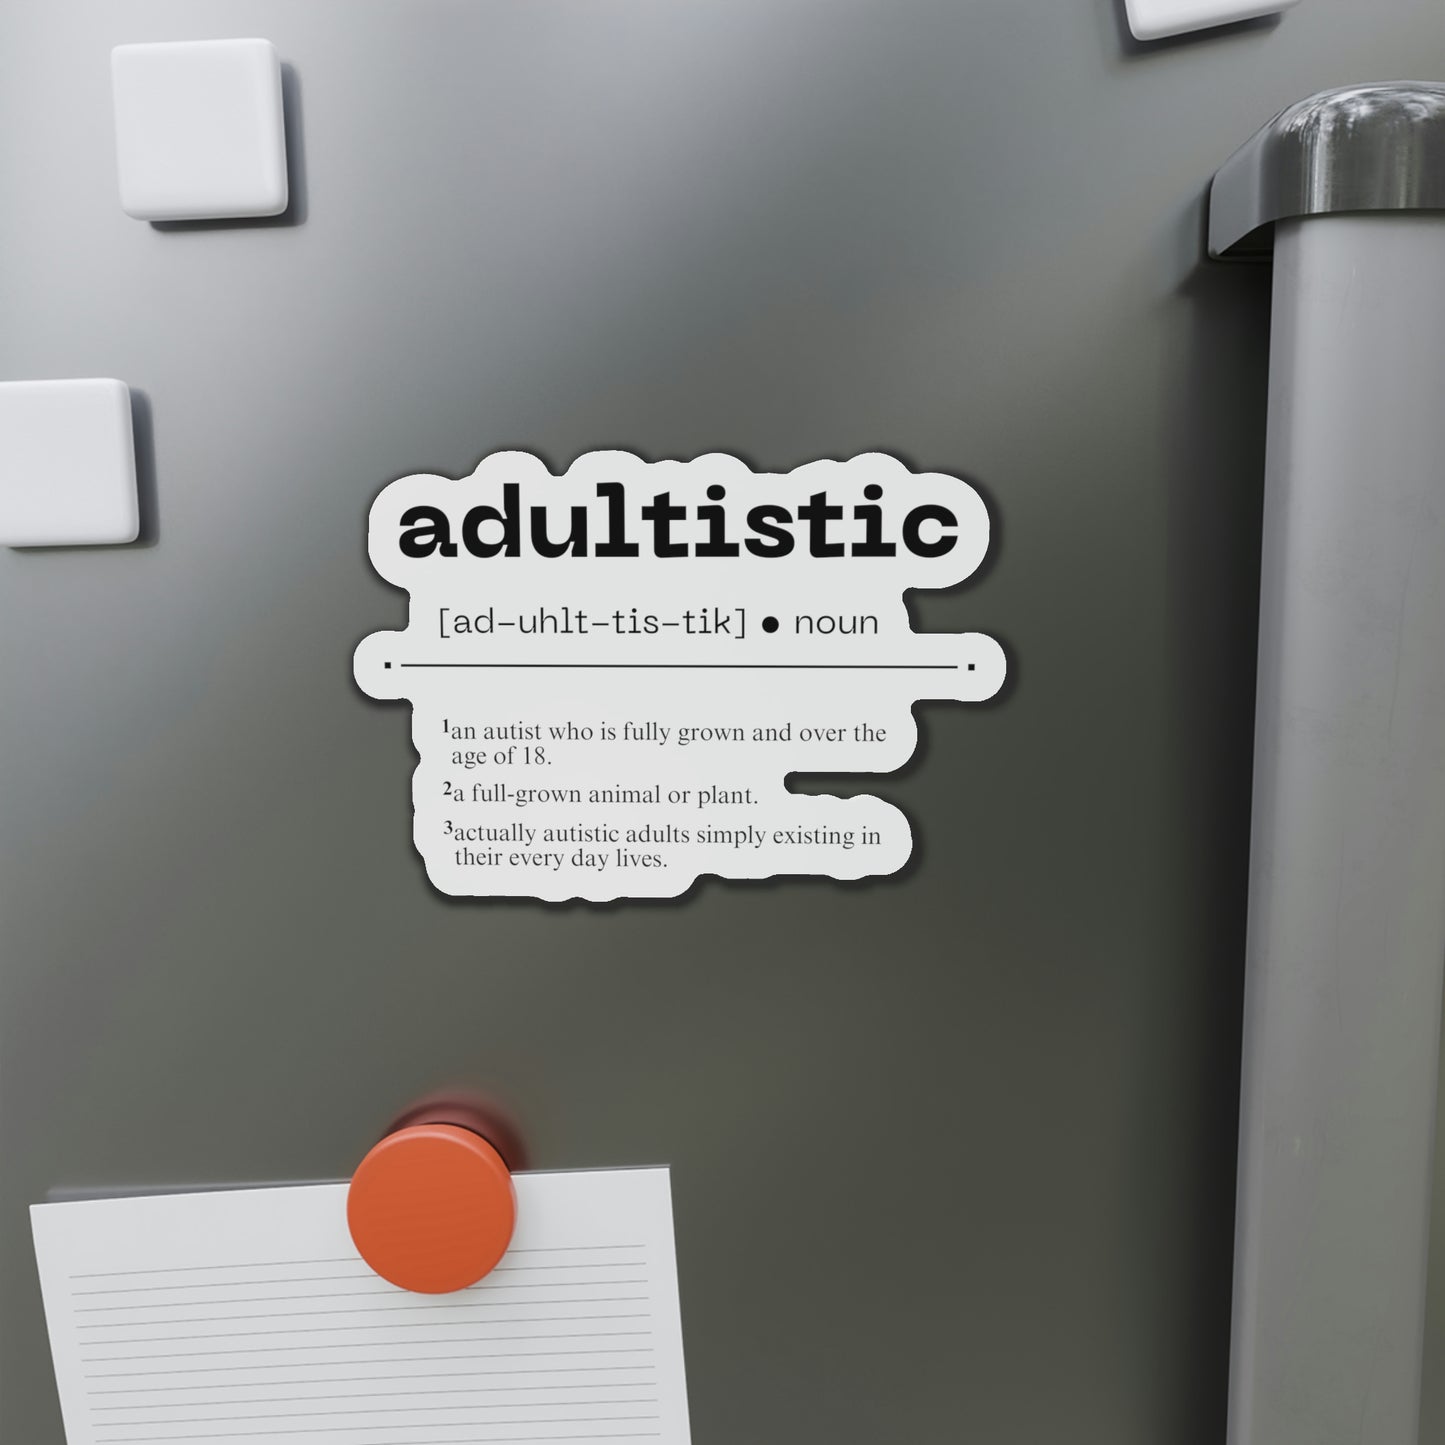 Adultistic [Redefined] Die-Cut Magnets